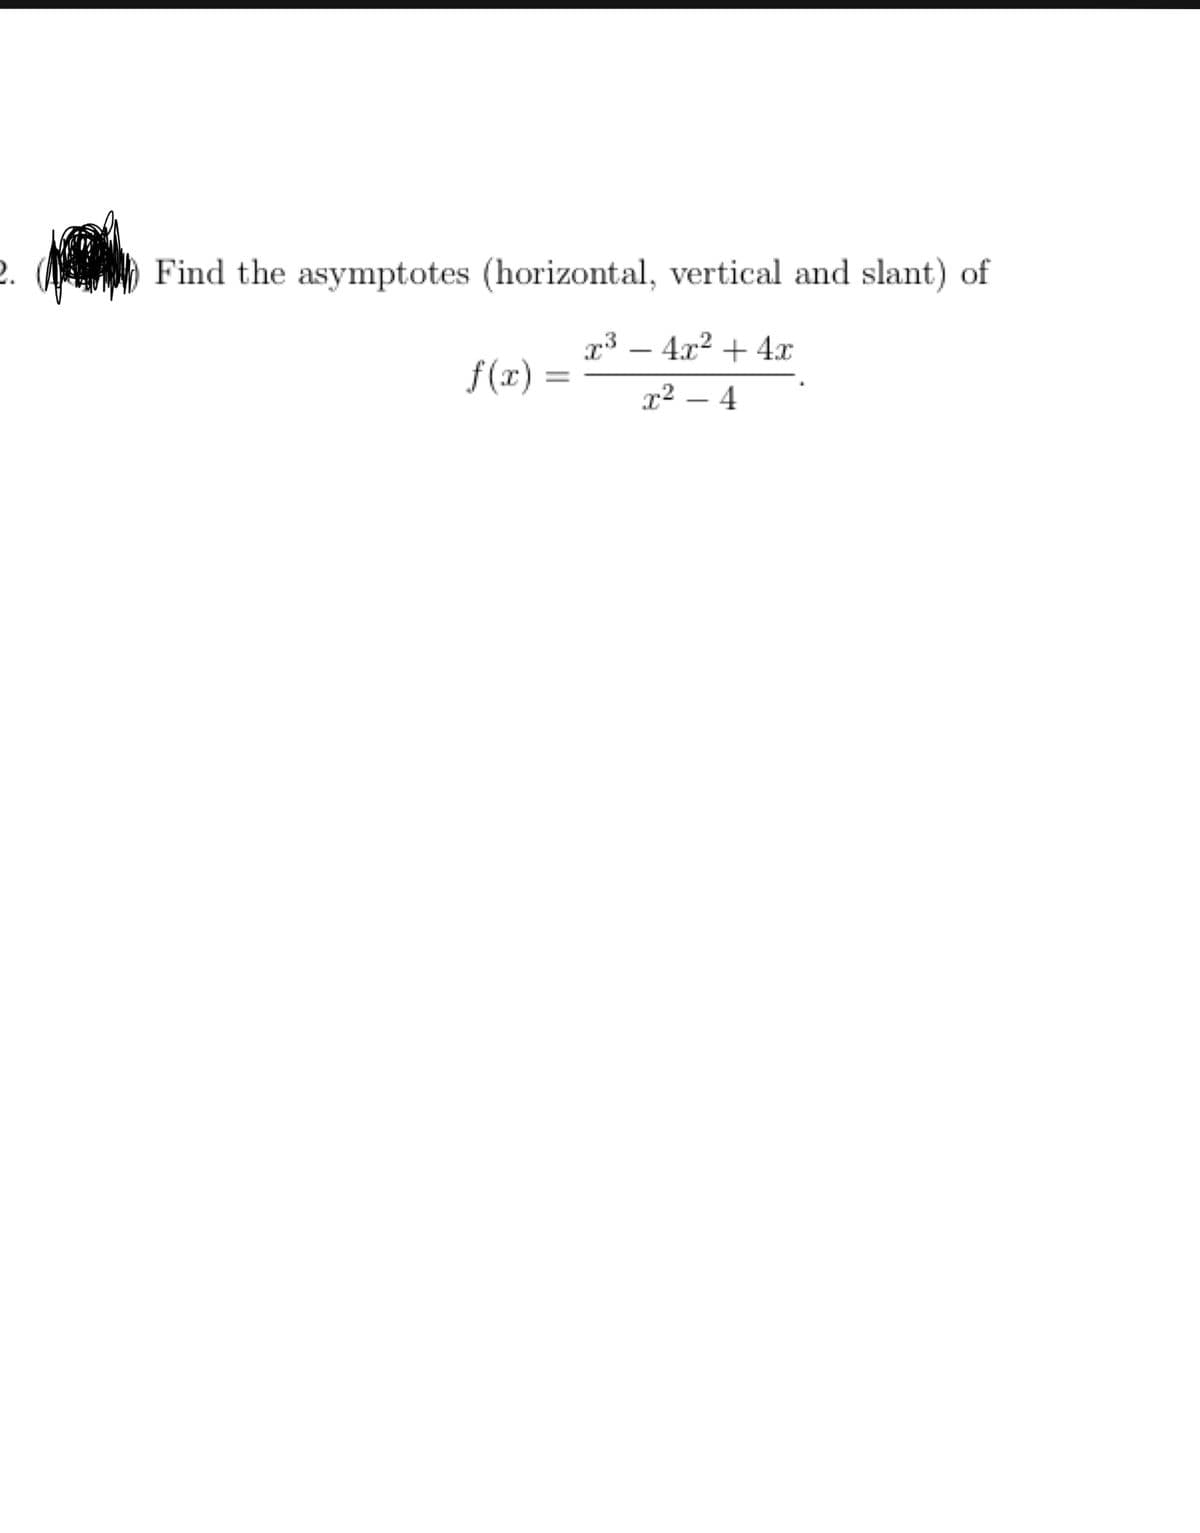 2.
Find the asymptotes (horizontal, vertical and slant) of
r3 – 4x2 + 4x
f (x)
r2 – 4
